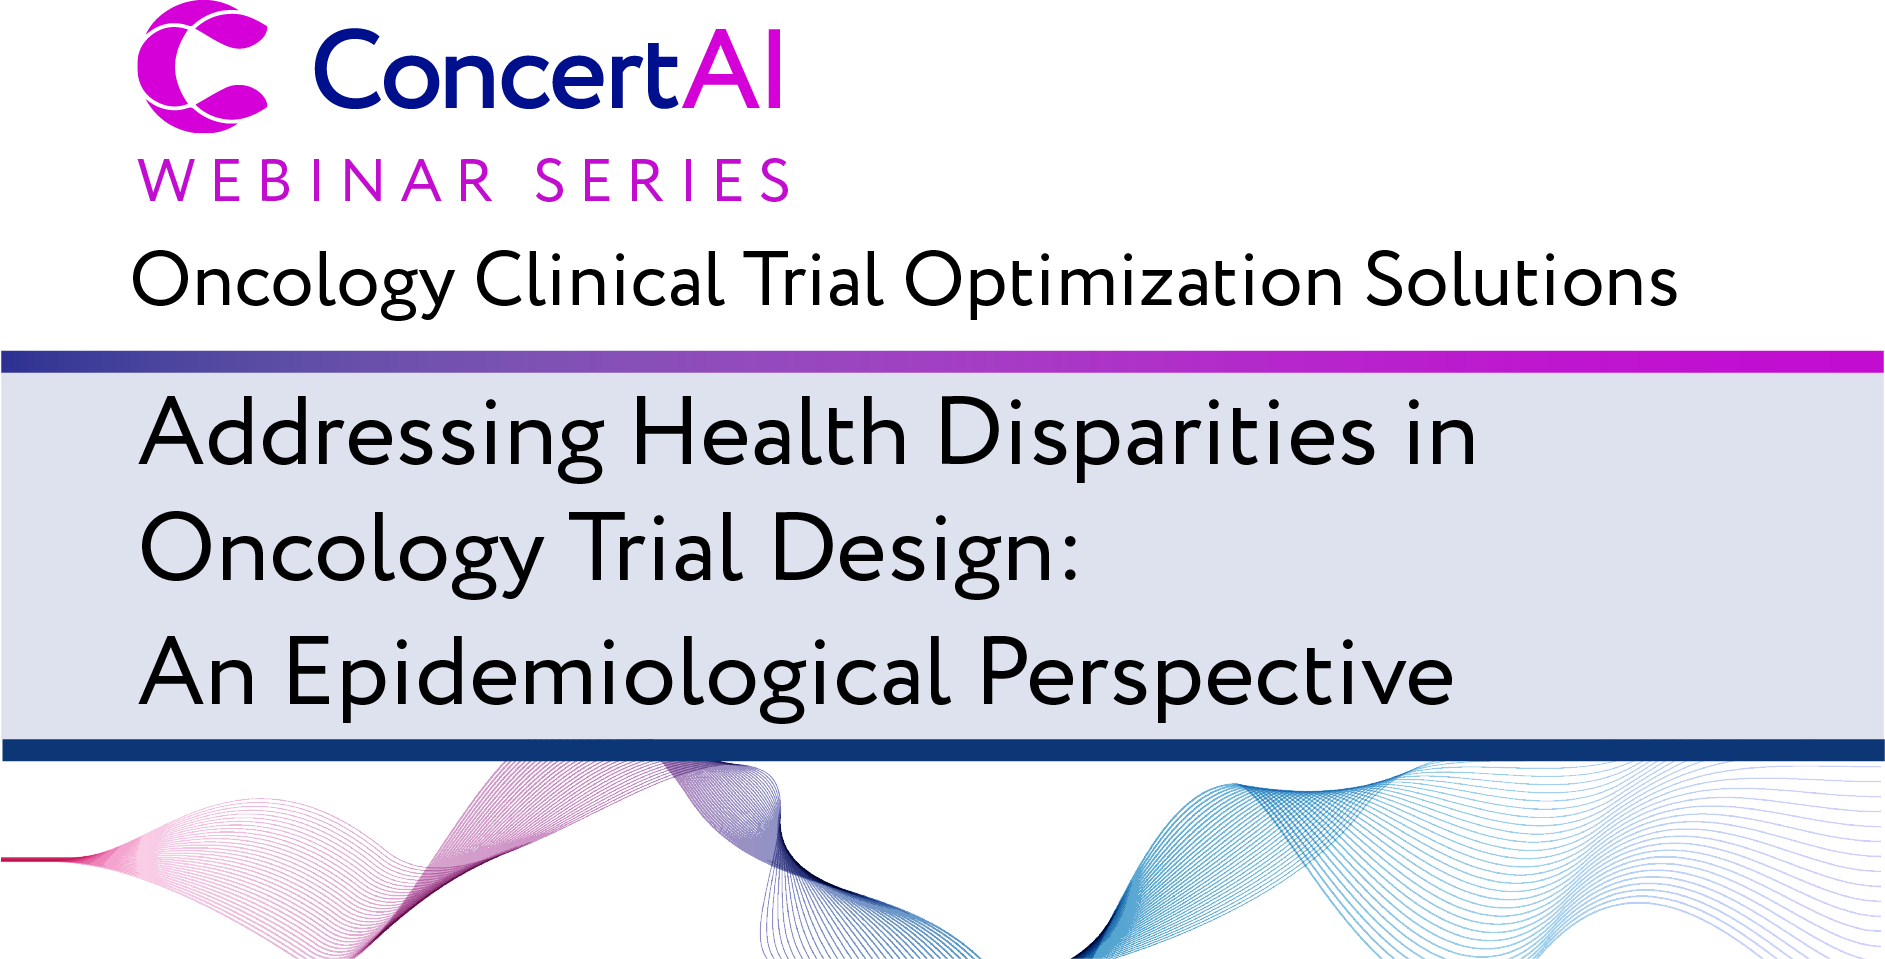 Addressing Health Disparities in Oncology Trial Design